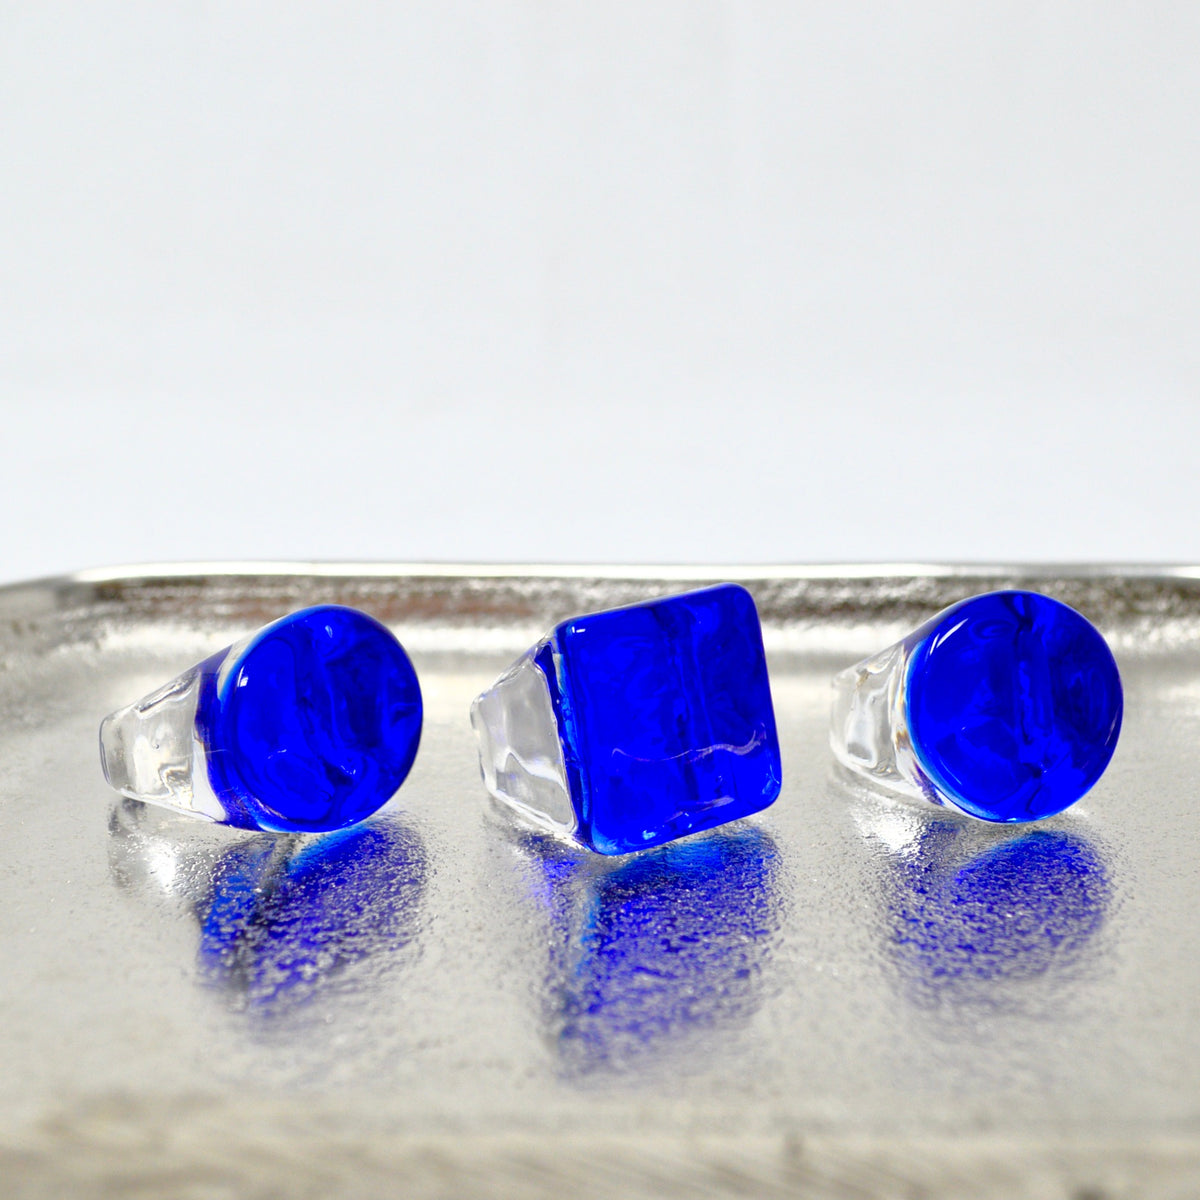 Murano Glass Statement Rings, Cobalt Glass, Oval, Square or Round - My Italian Decor